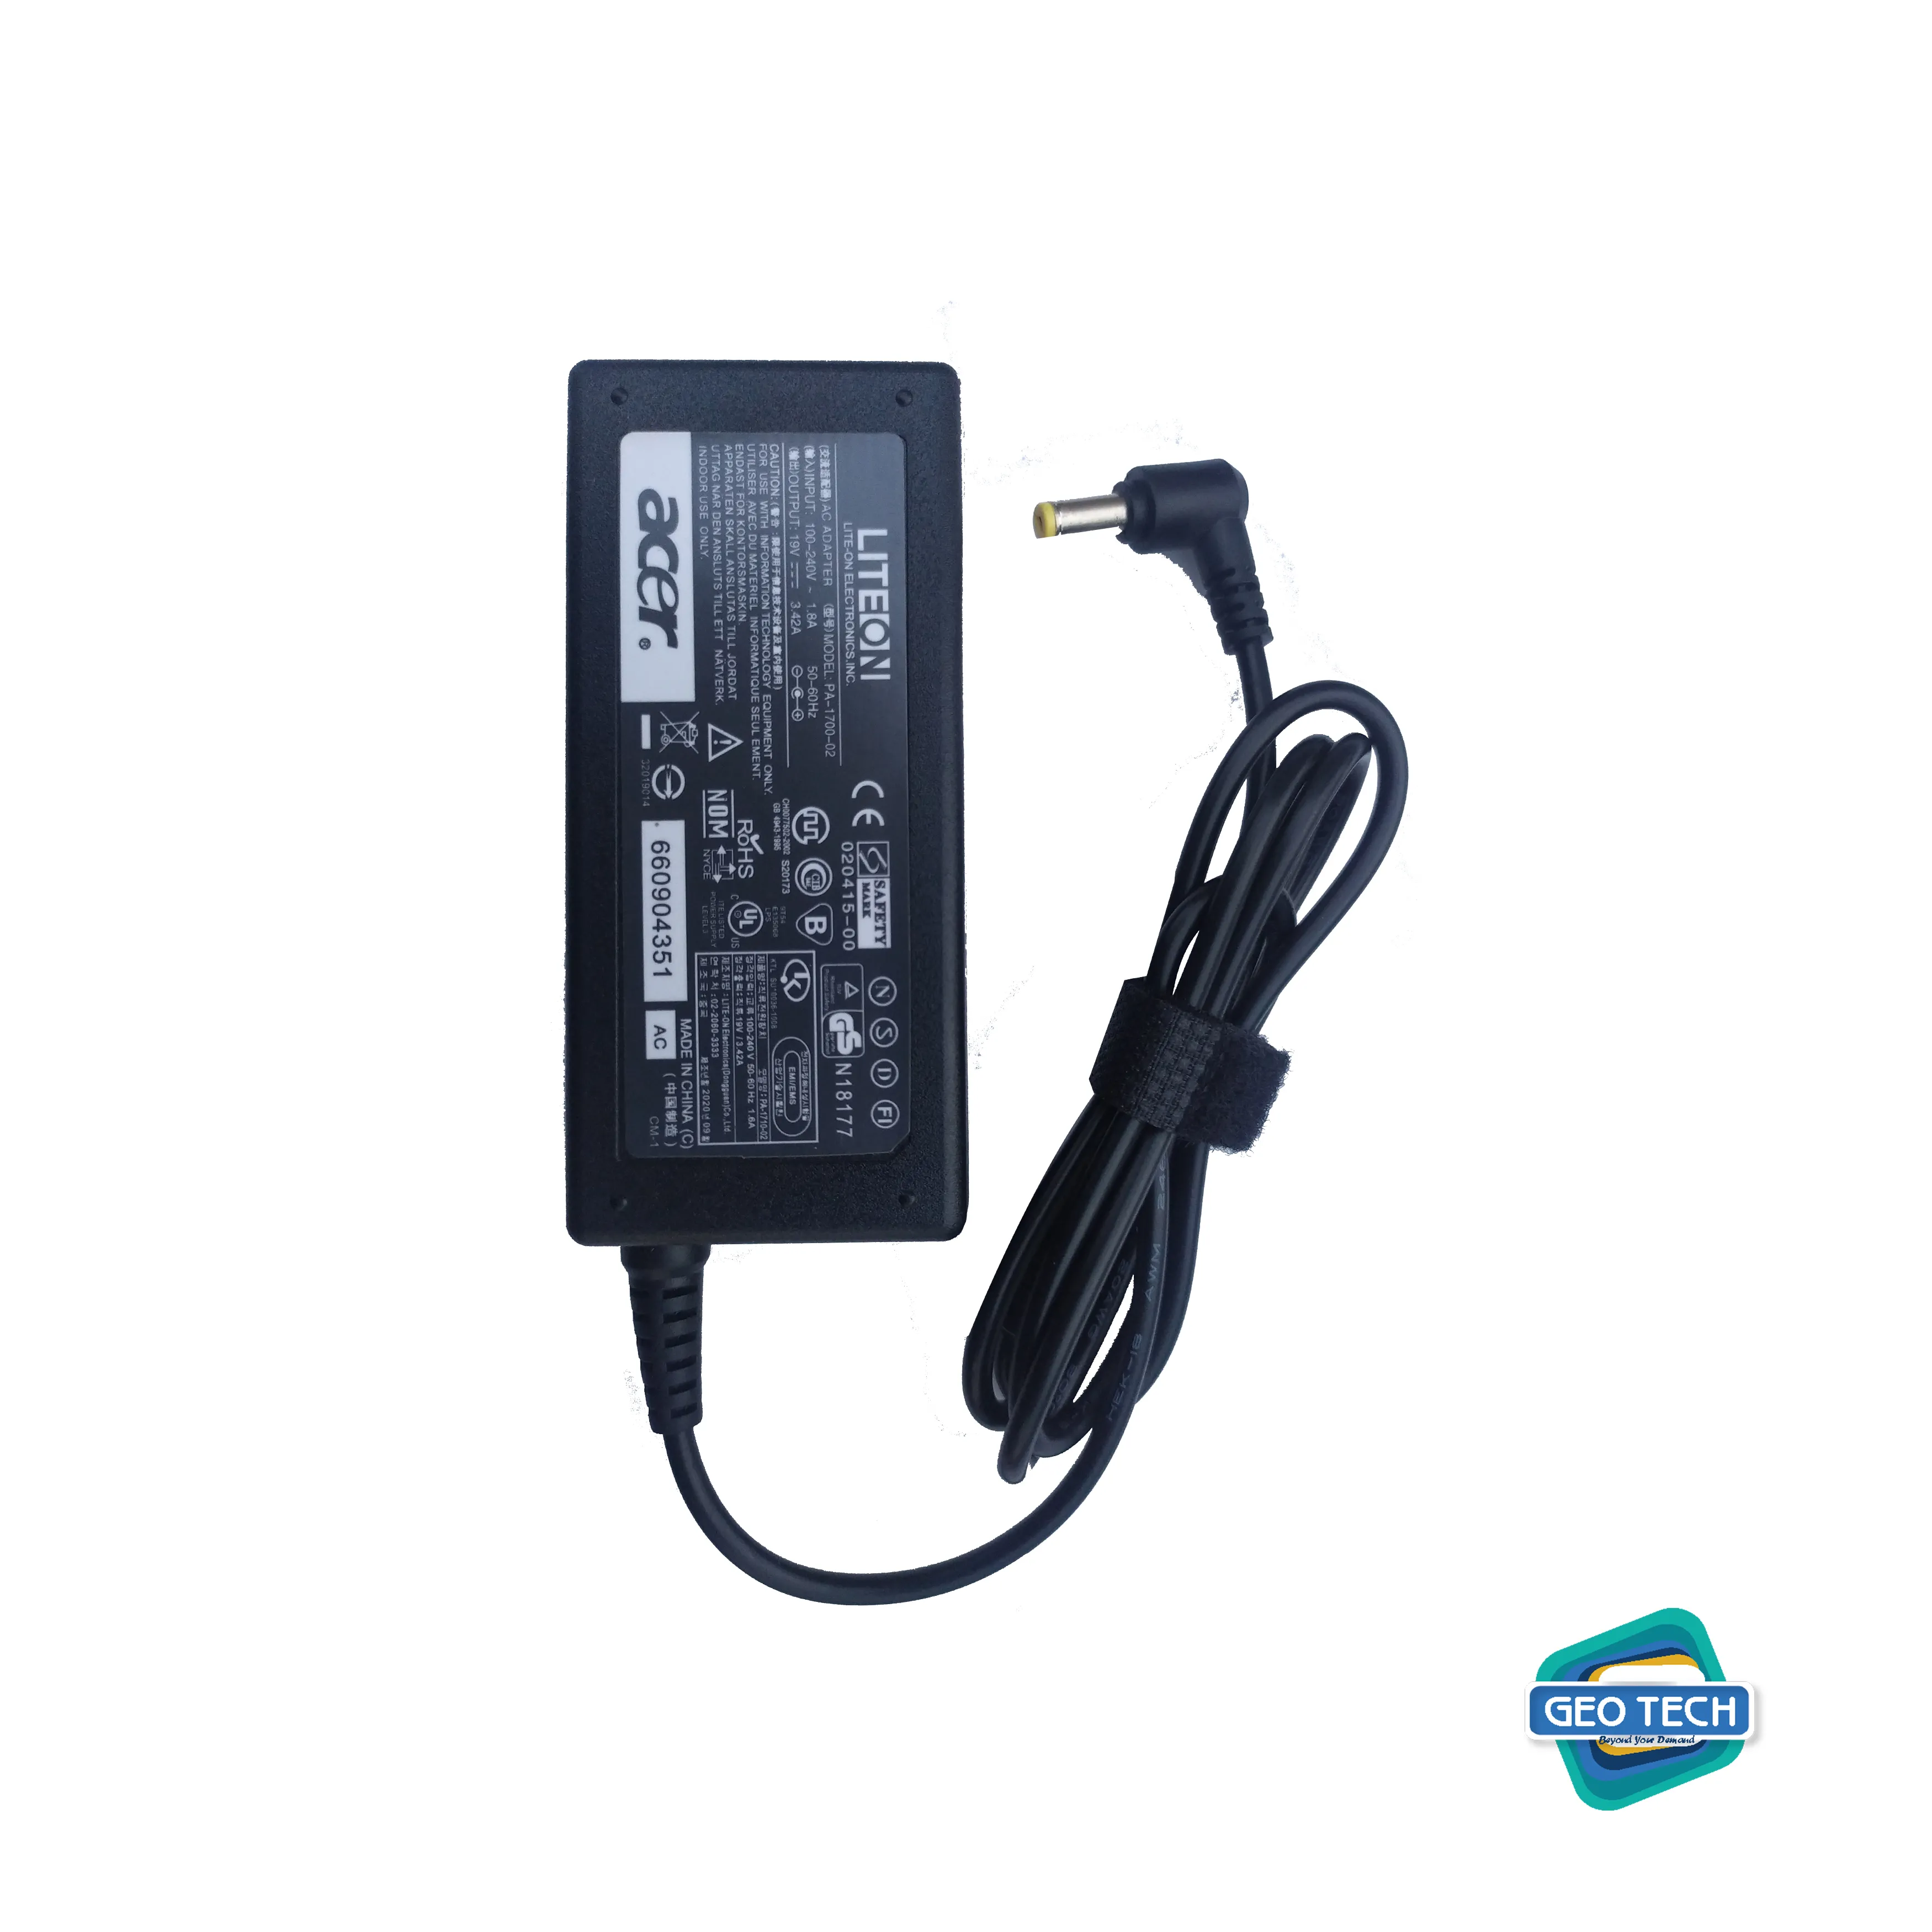 ACER 19V 3.42A 65W 5.5*1.7mm (Yellow Tip) for Acer Aspire Es1 ES1-511 E1 E3 E5 E3-111 5315 5332 Laptop Notebook Charger AC Adapter, LITE-ON/ HIPRO HP-A0652R3B AC Adapter-Laptop 19V 3.42A 65W, Barrel 5.5/1.7mm, 3-Prong